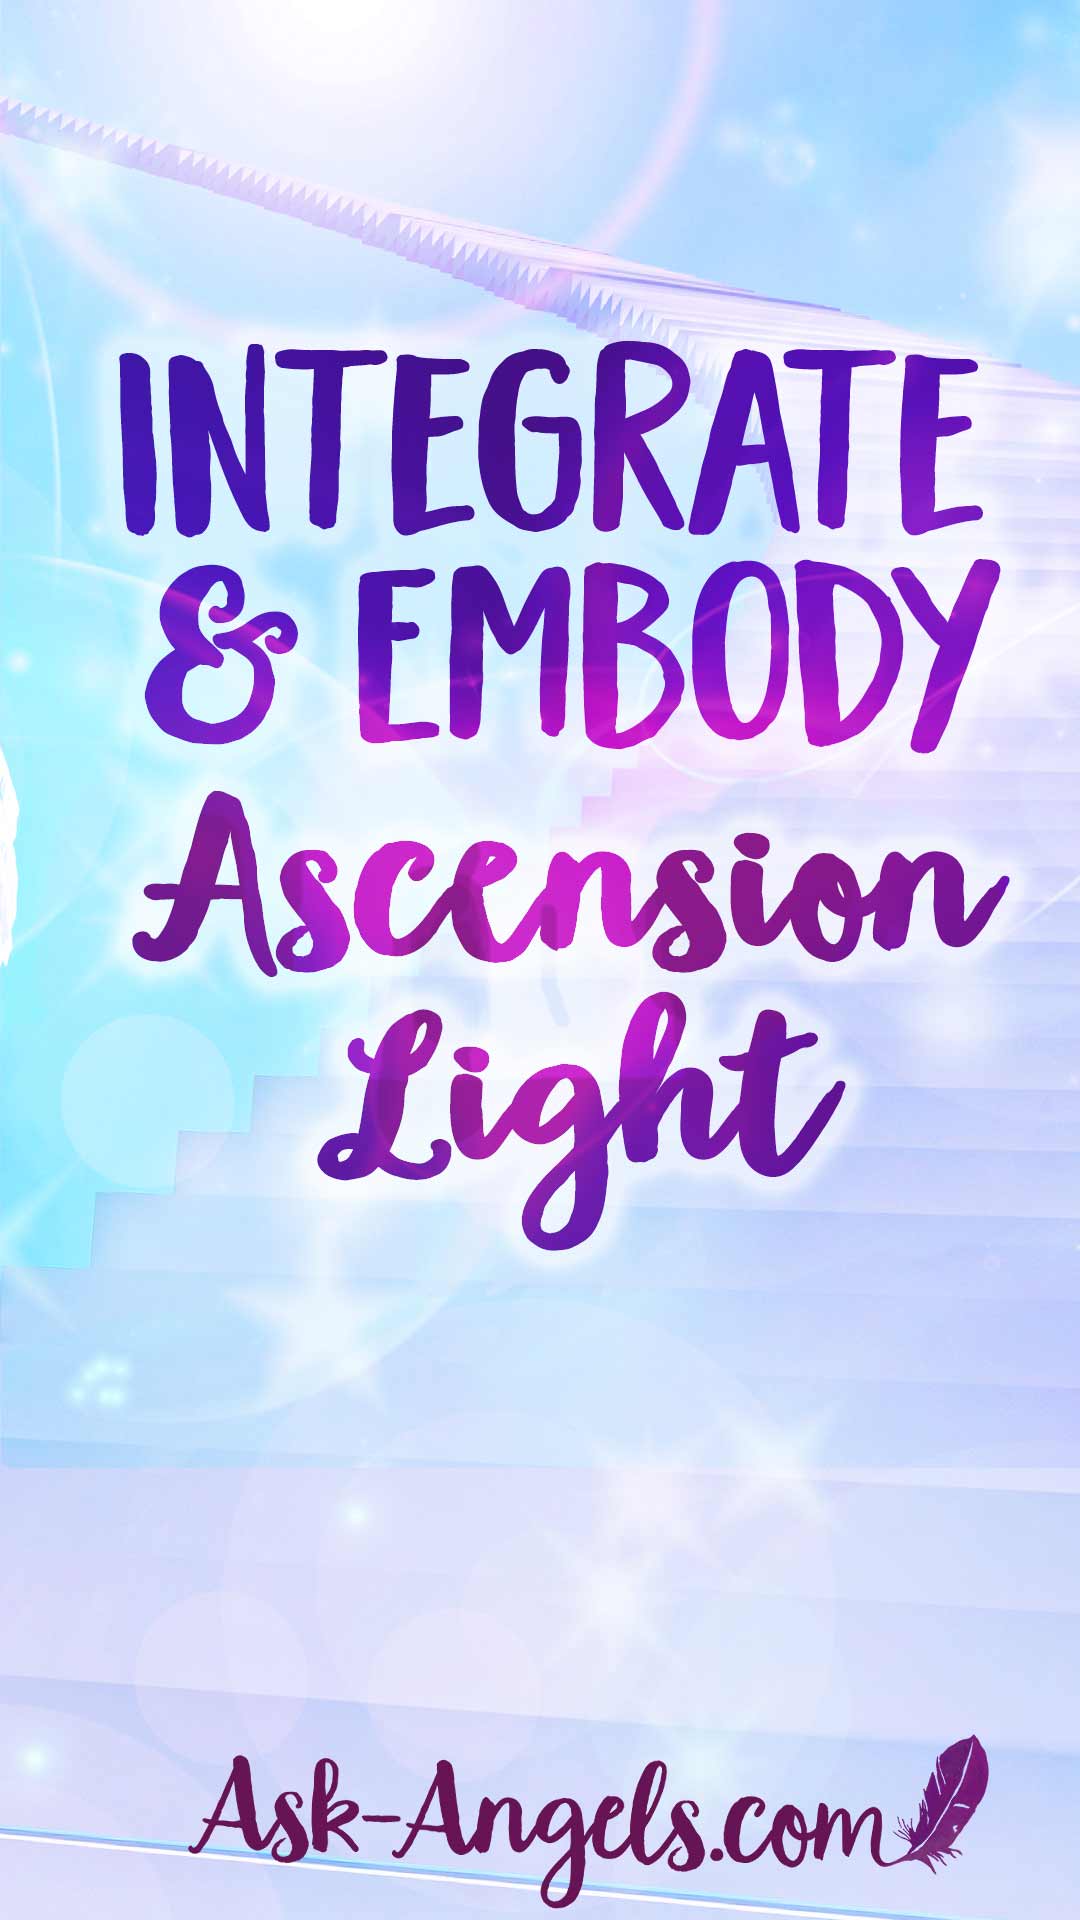 Integrate and embody ascension light... Click to learn a simple process for receiving and integrating higher levels of light and ascension energy now.